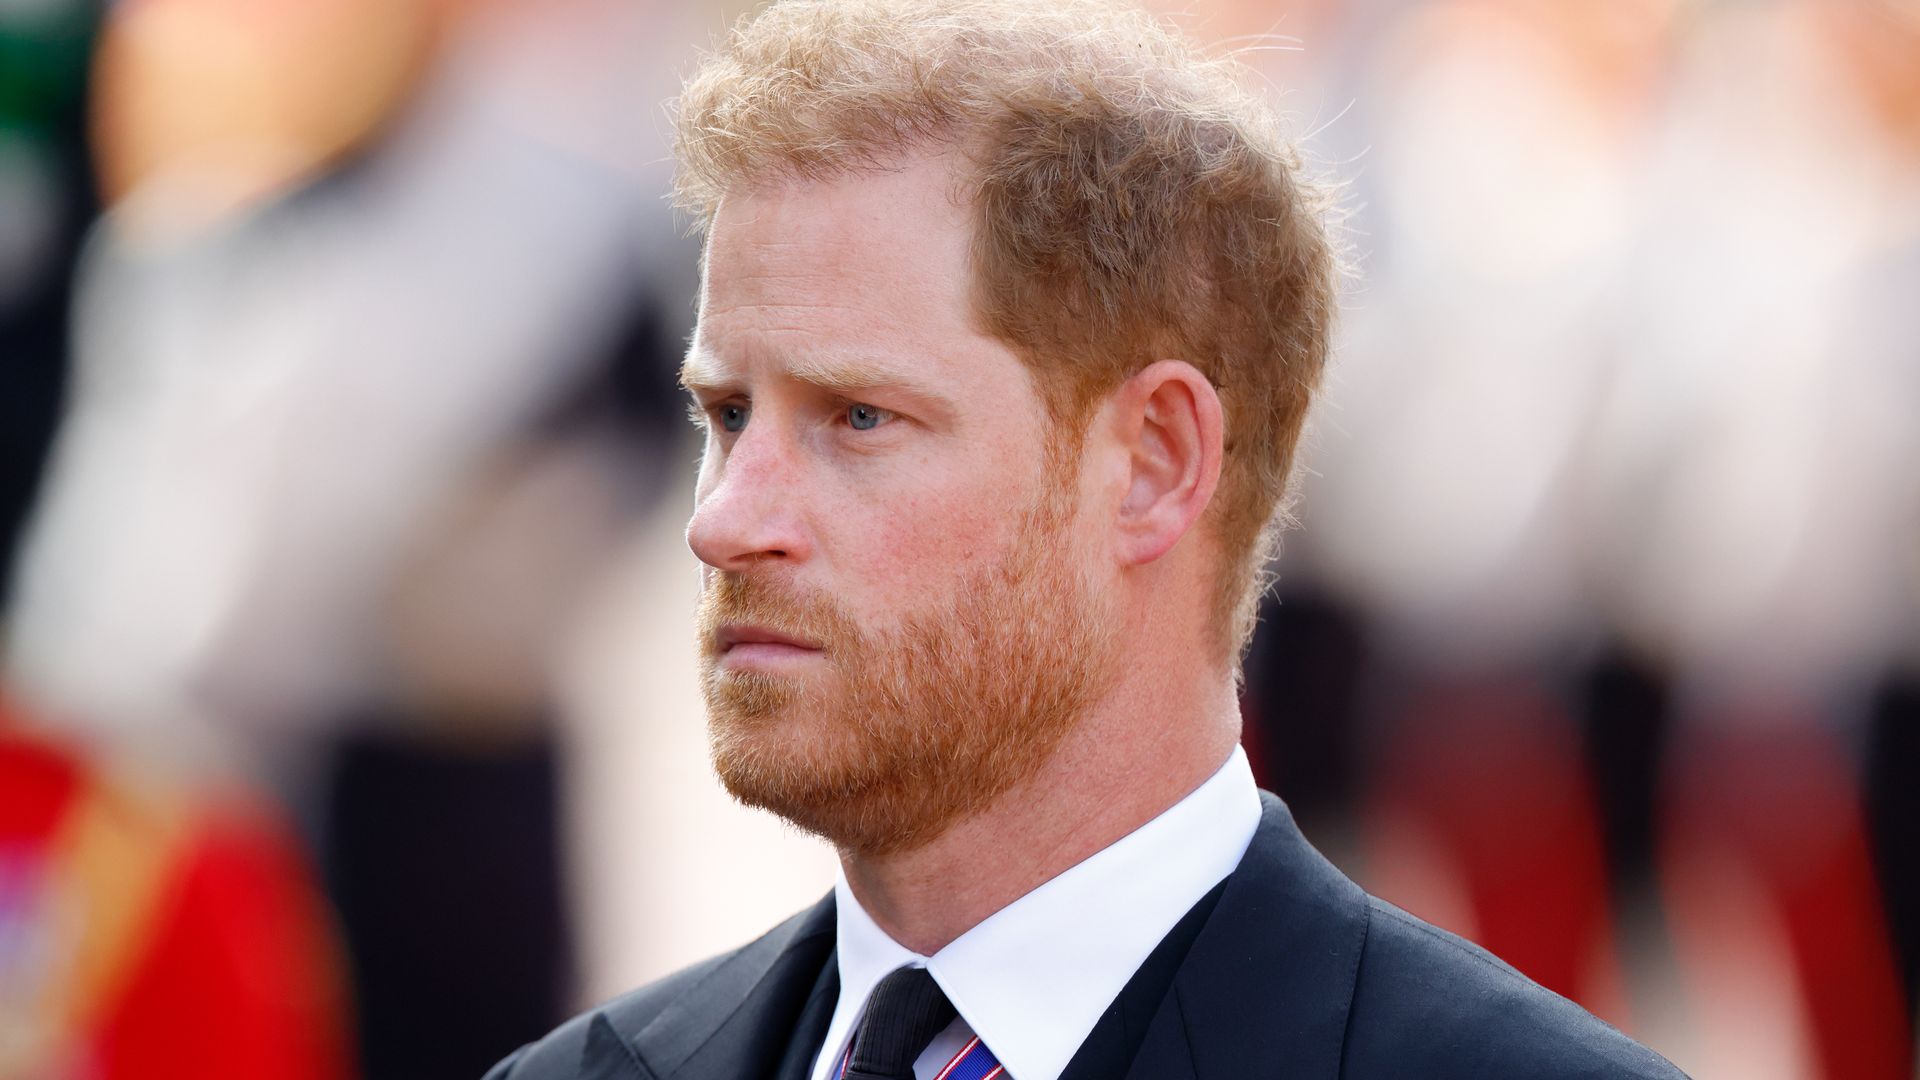 Prince Harry's latest honor as a 'living legend' sparks debate